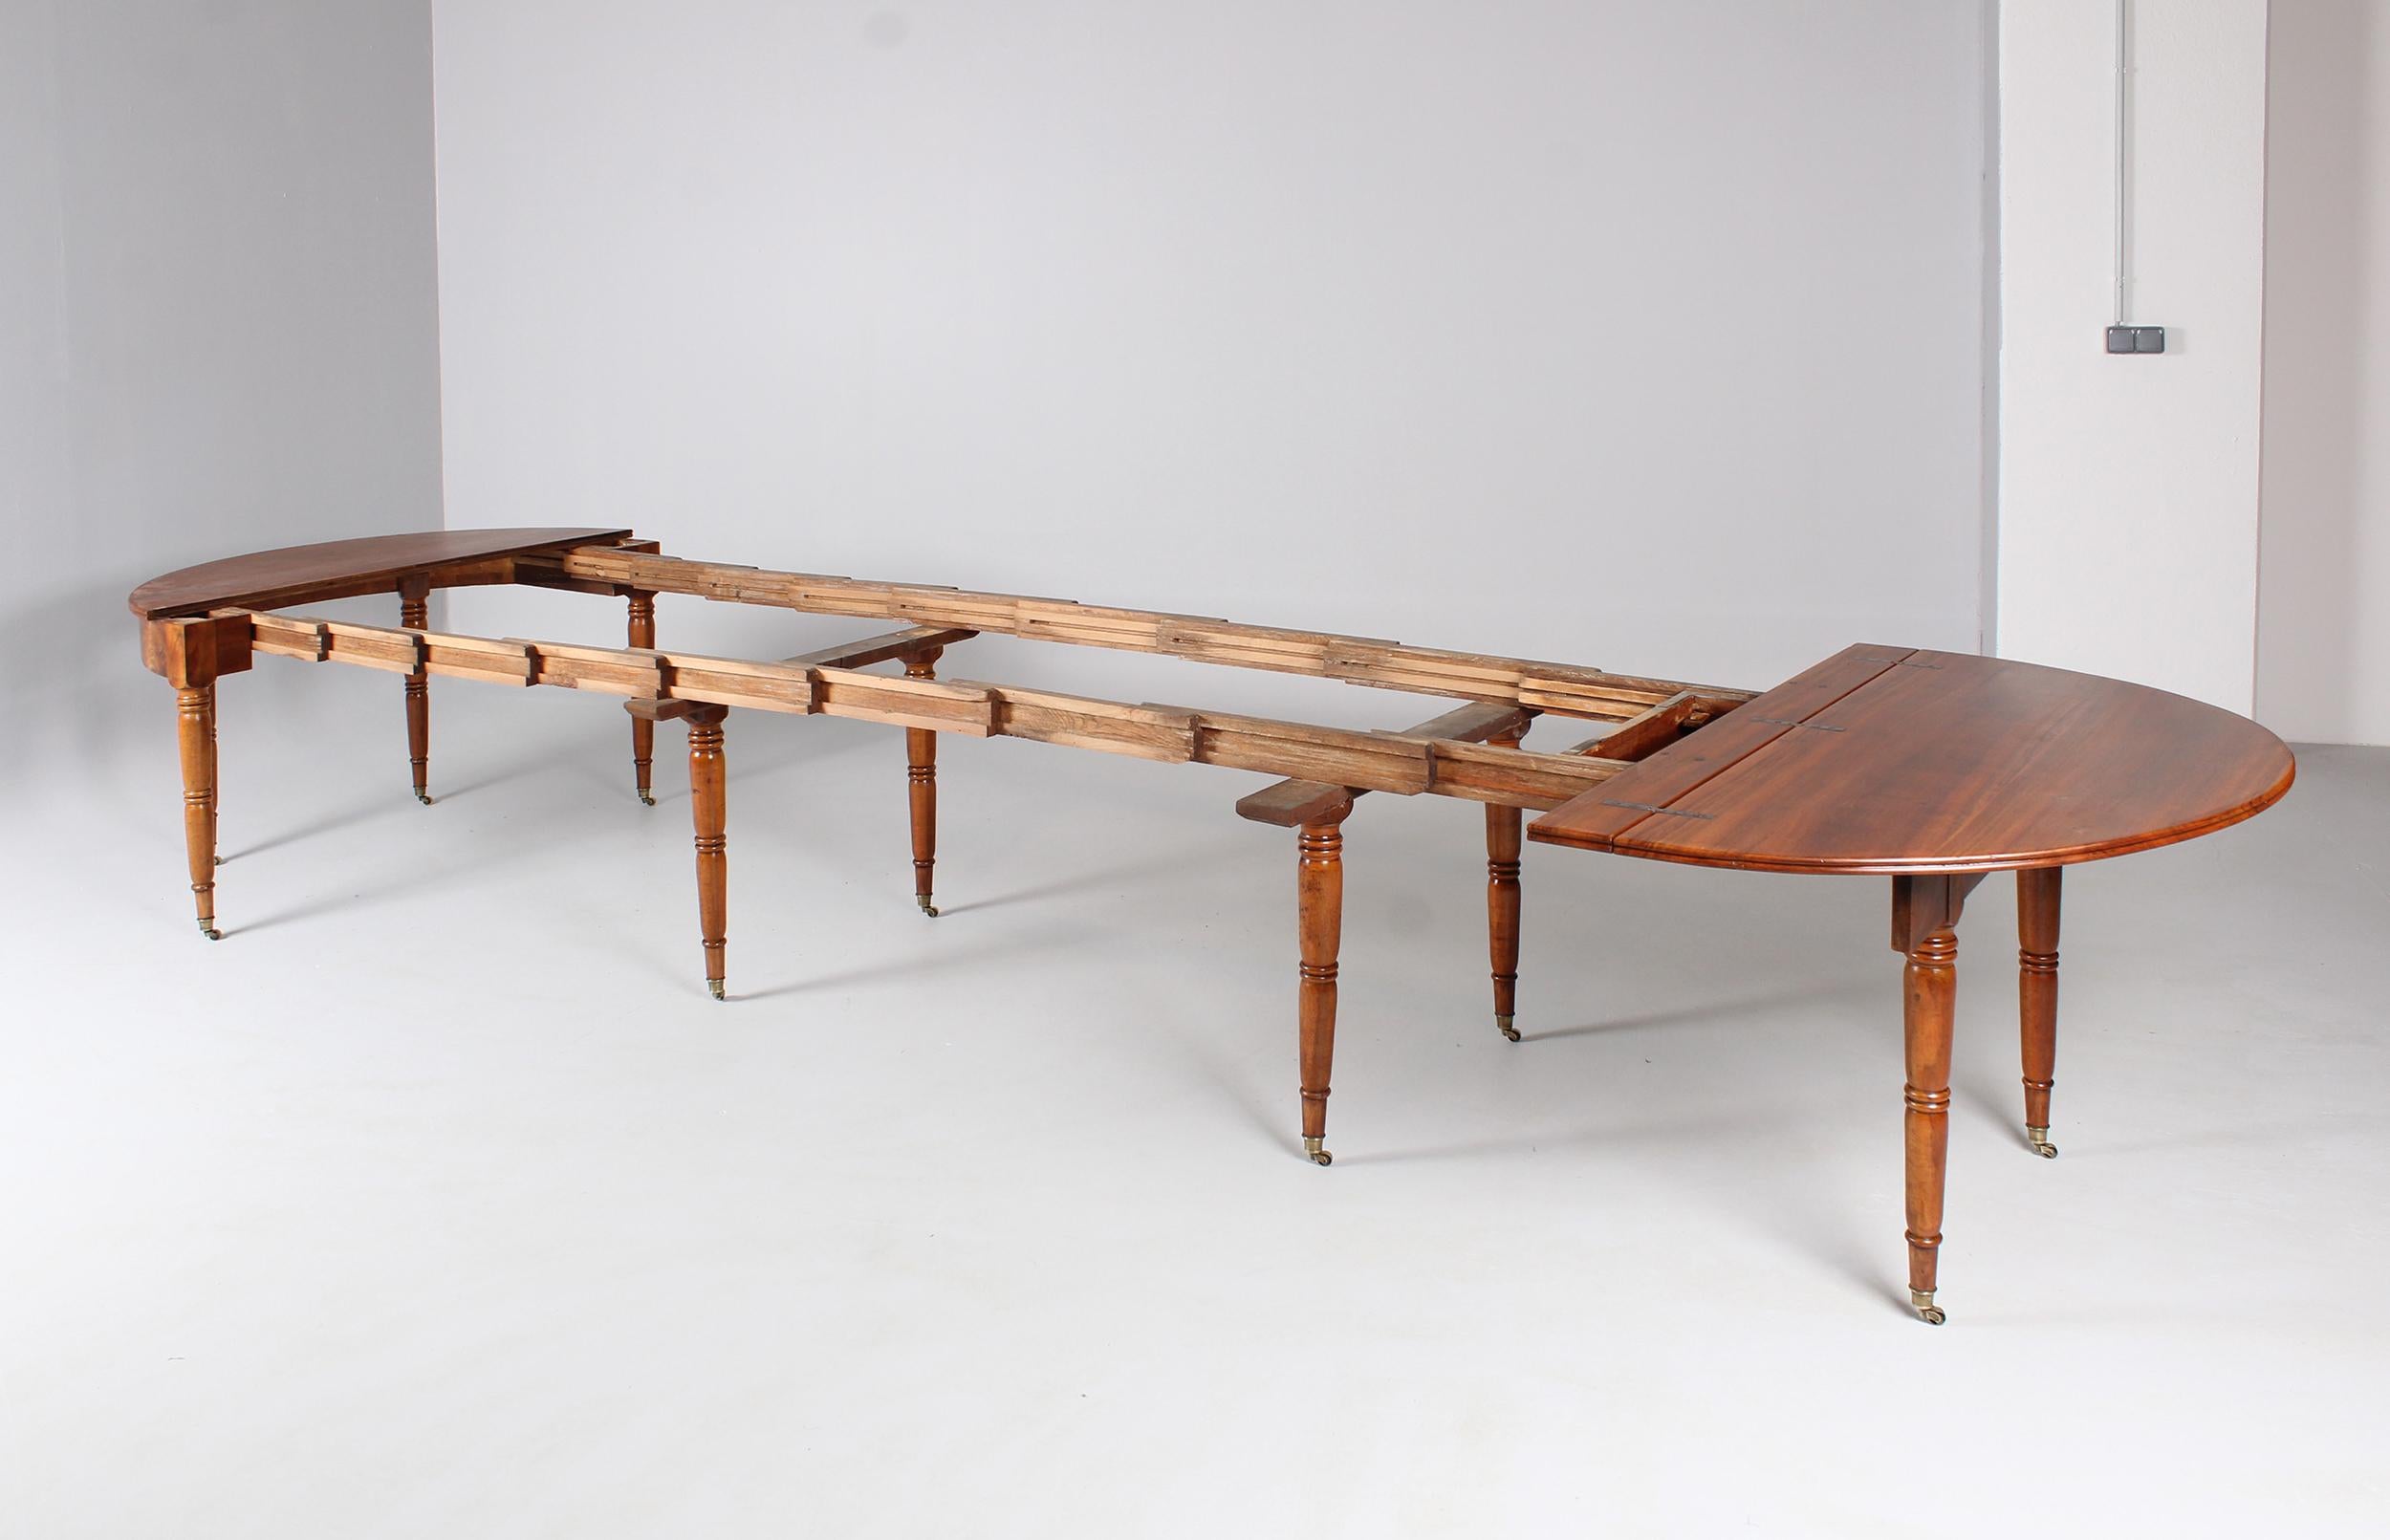 Large 19th Century Dining Table, Walnut, 12-16 People 5